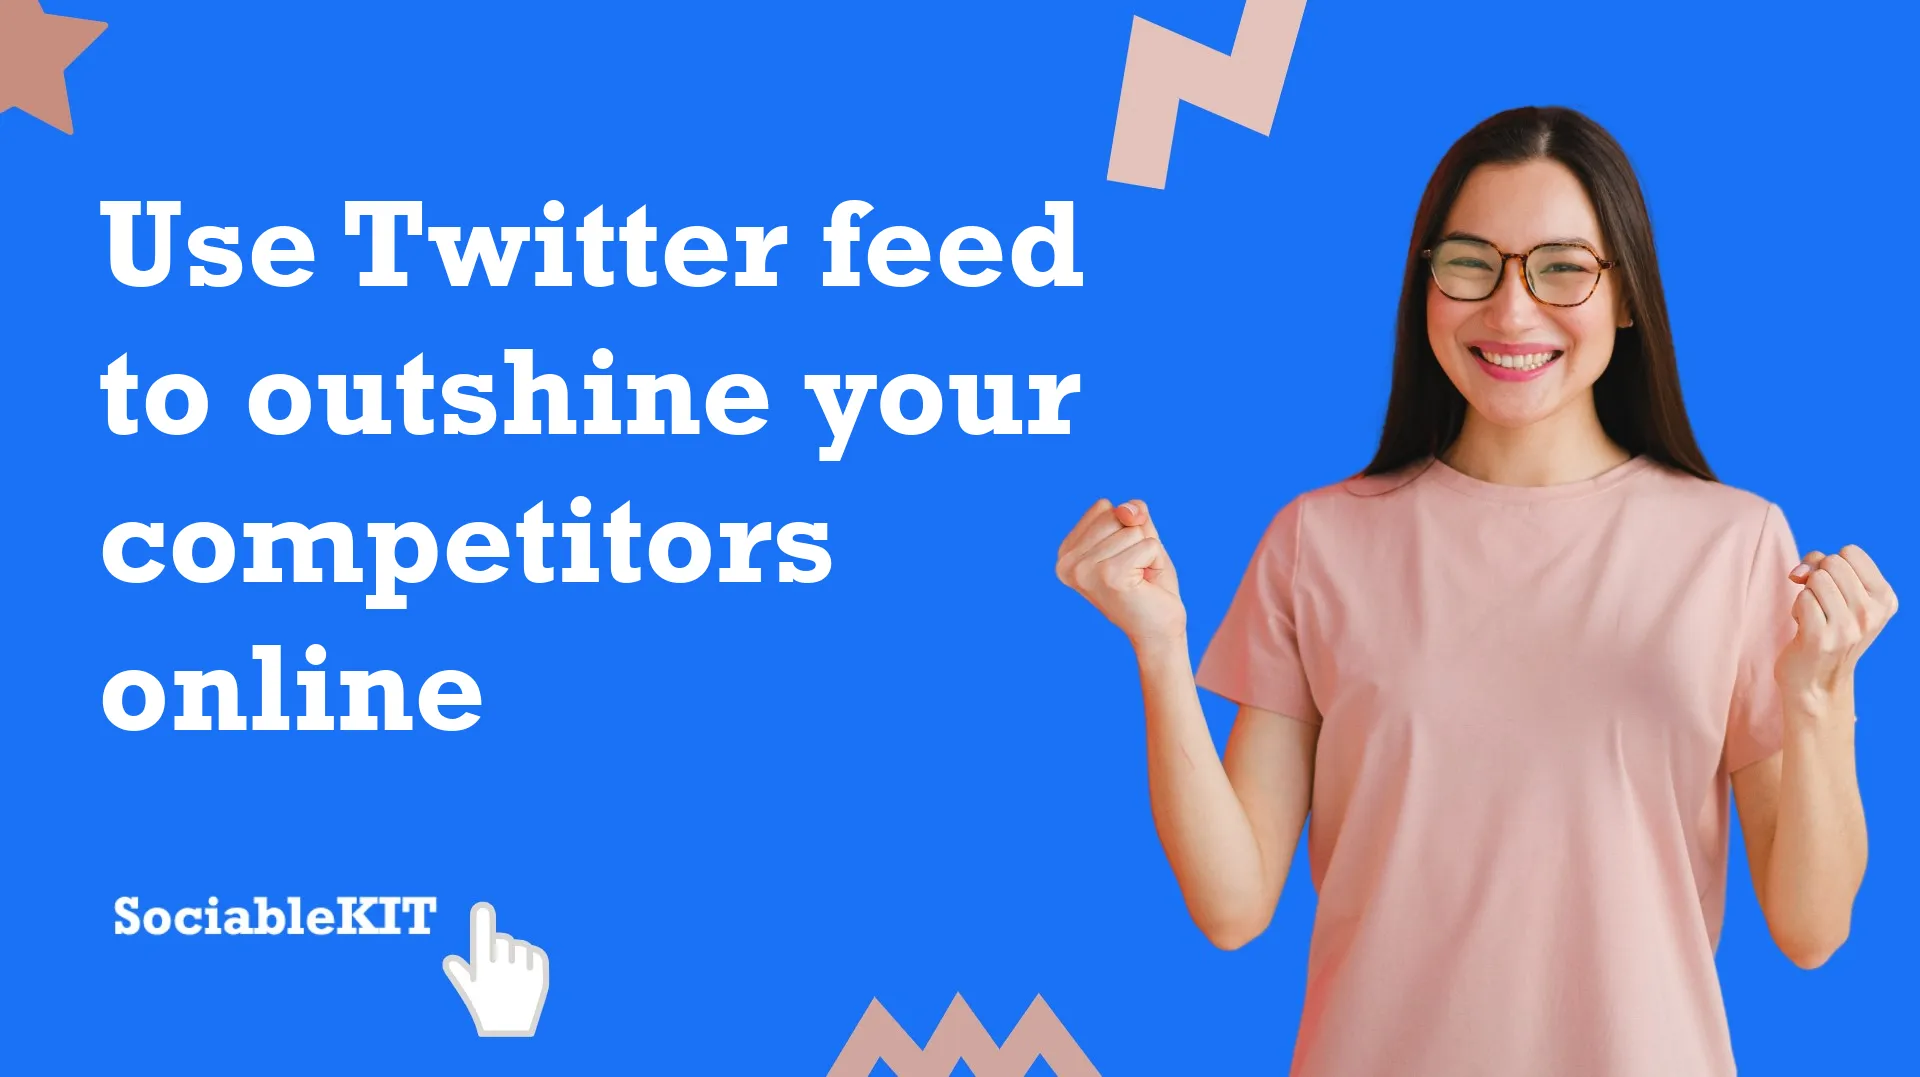 Use Twitter feed to outshine your competitors online